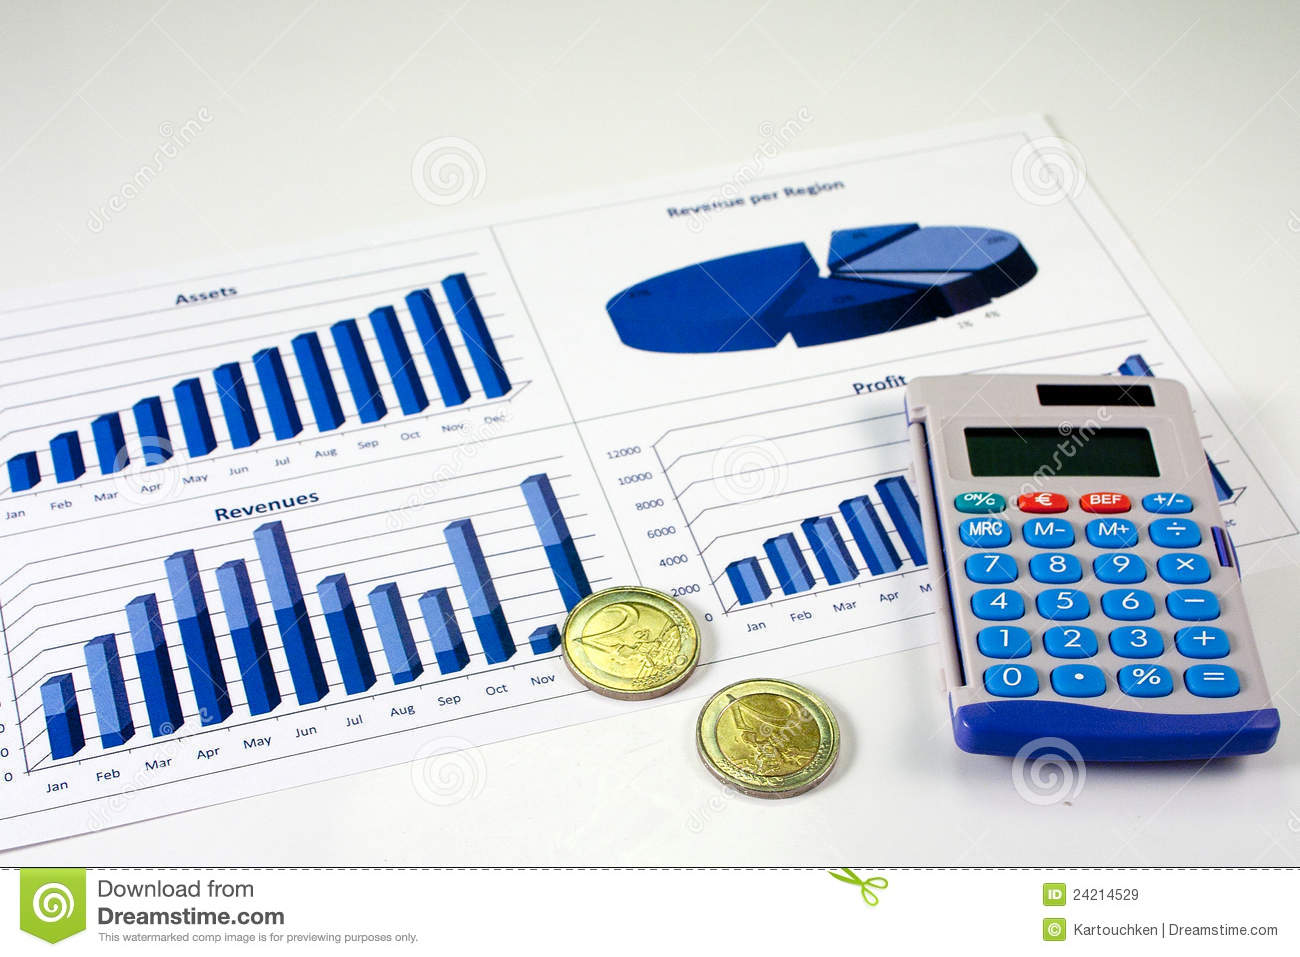 Financial Management Chart   10 Royalty Free Stock Images   Image